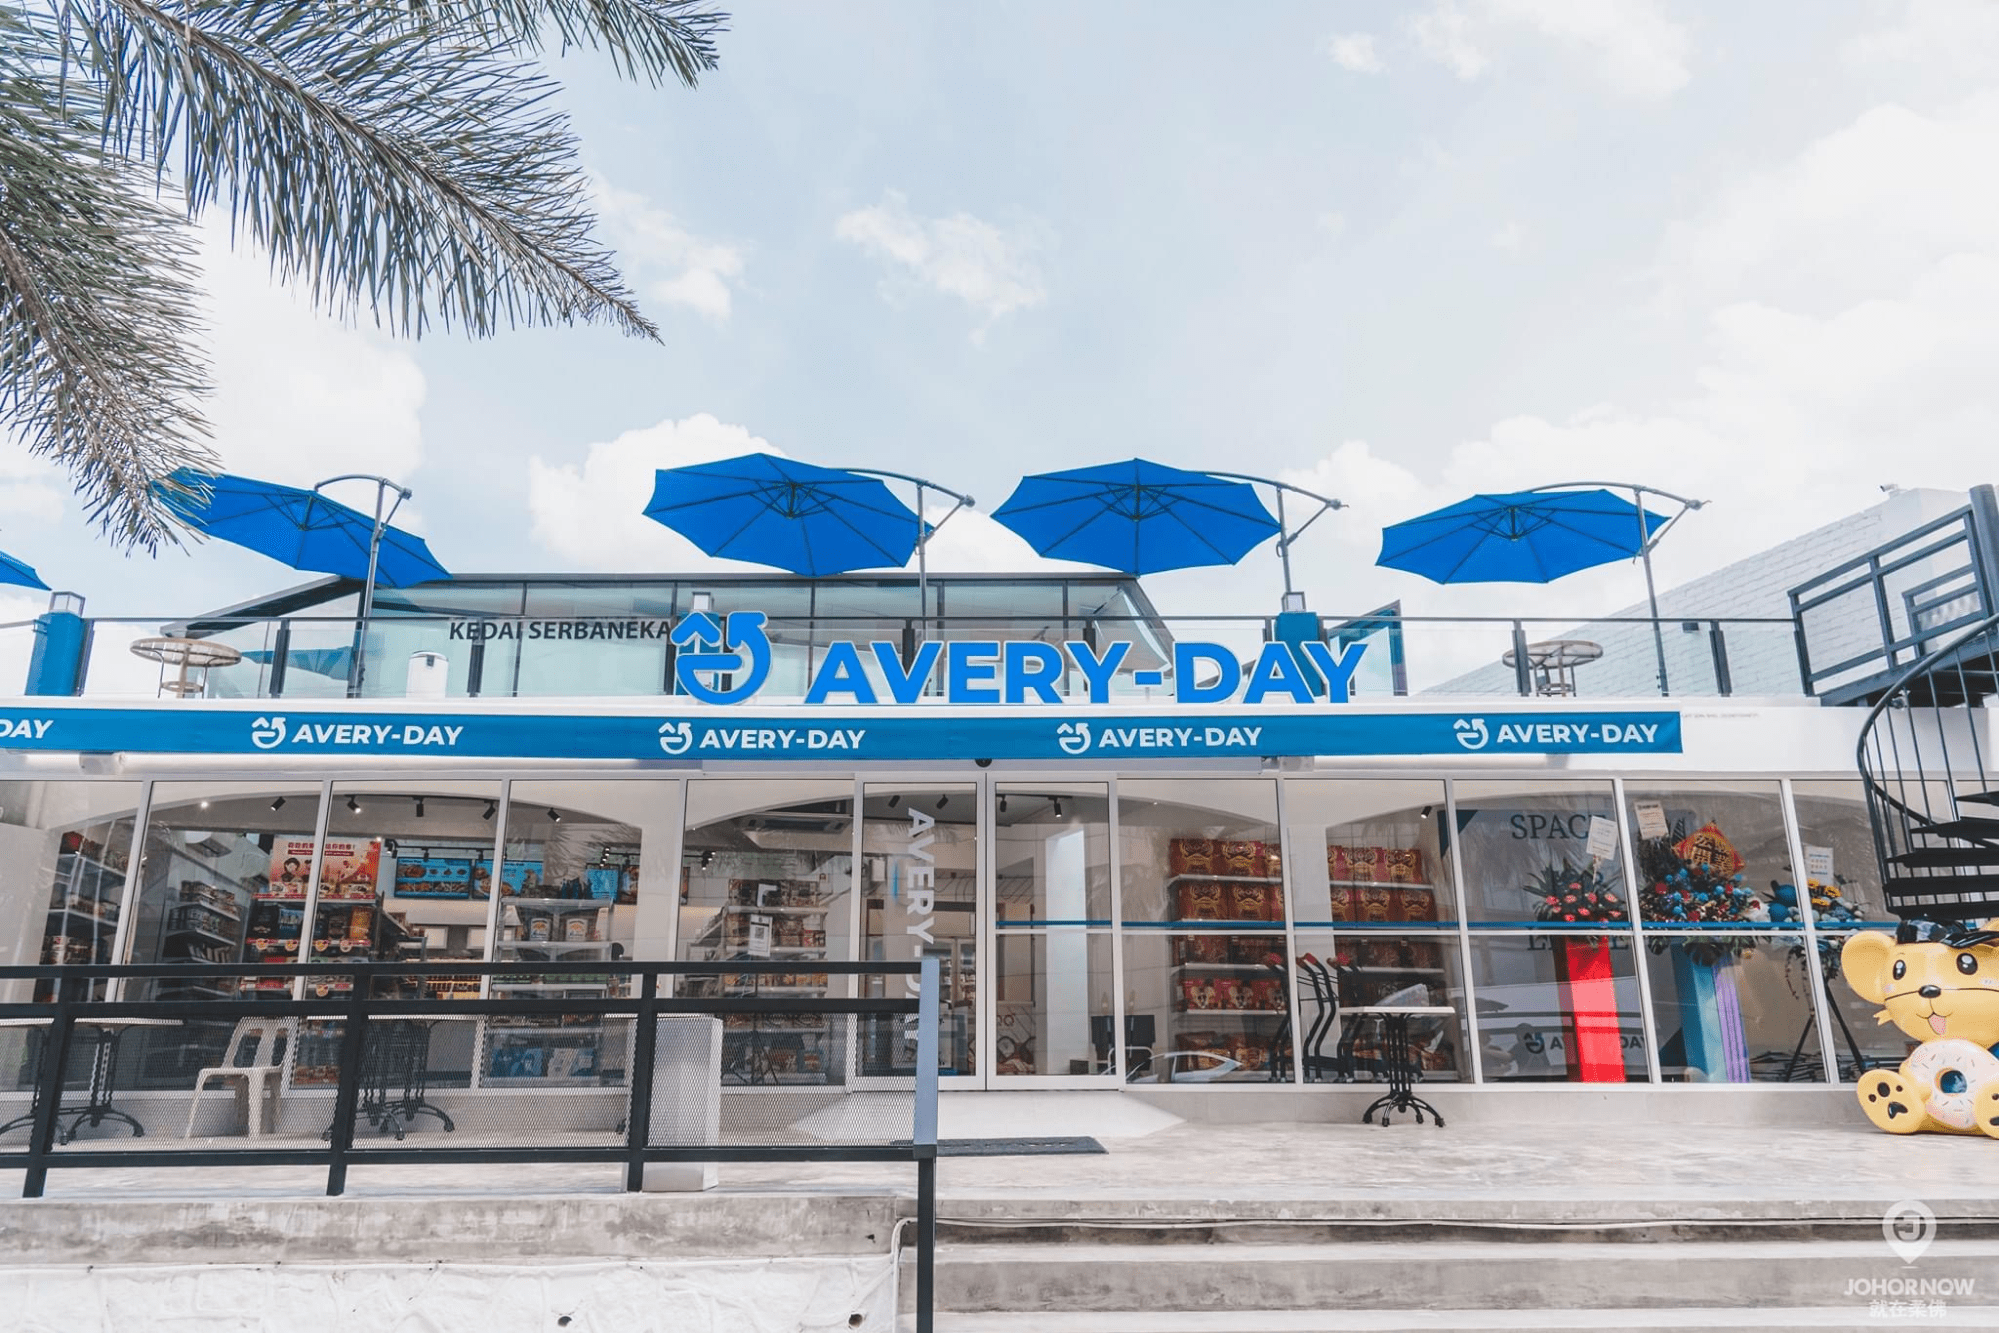 avery-day - covenience store jb